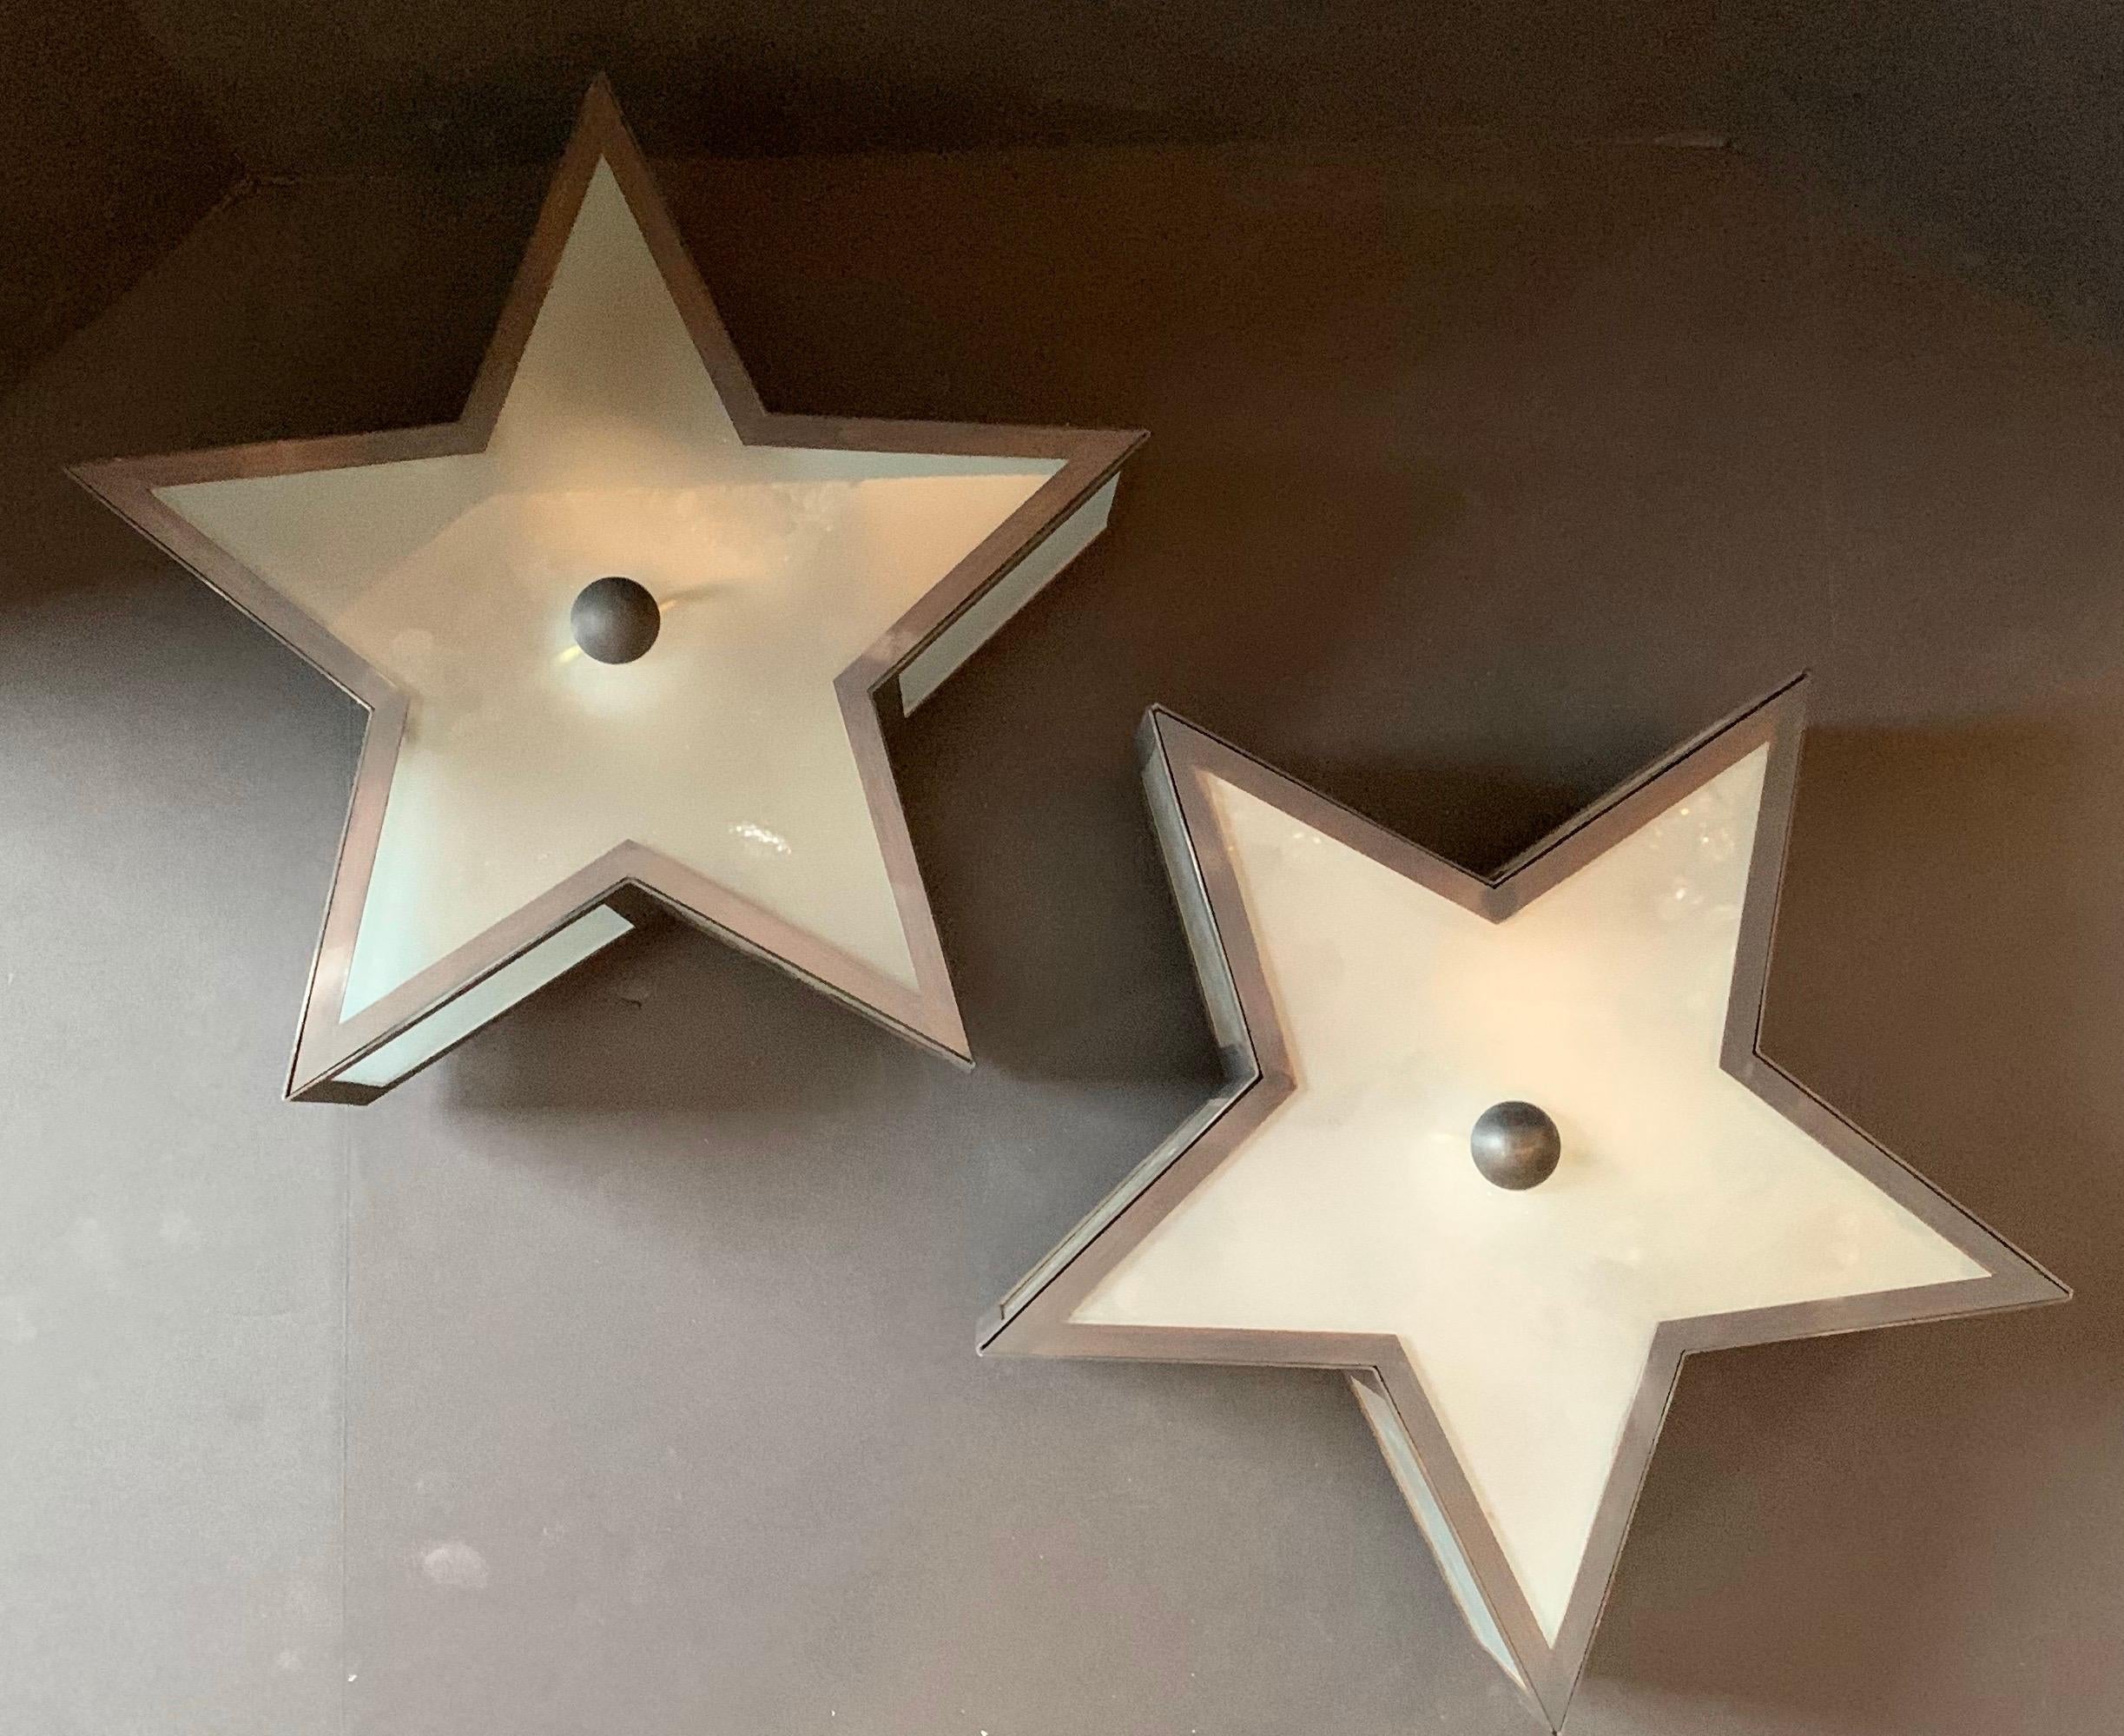 Wonderful Mid-Century Modern patinated bronze patina star form frosted glass flush mount light fixtures four available
Each sold separately.